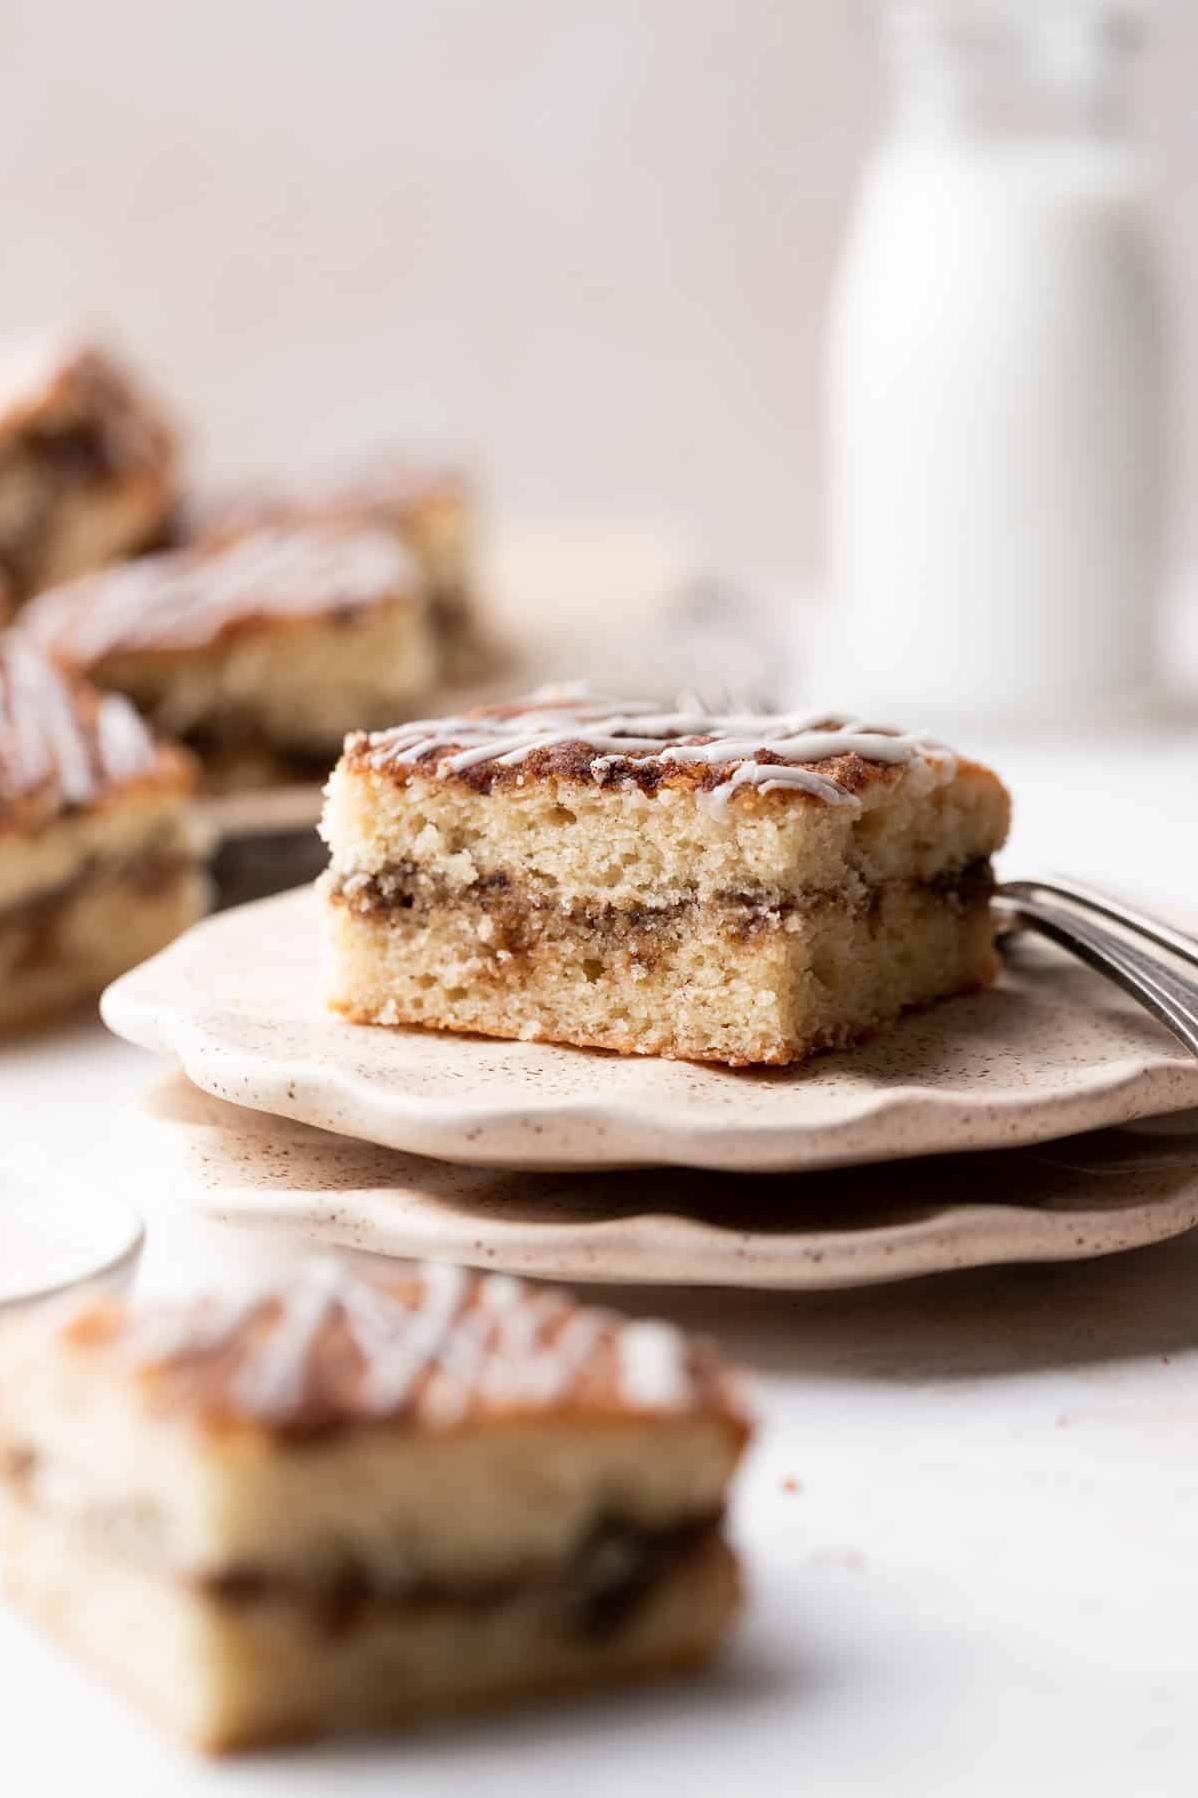  A coffee cake that'll make your taste buds dance